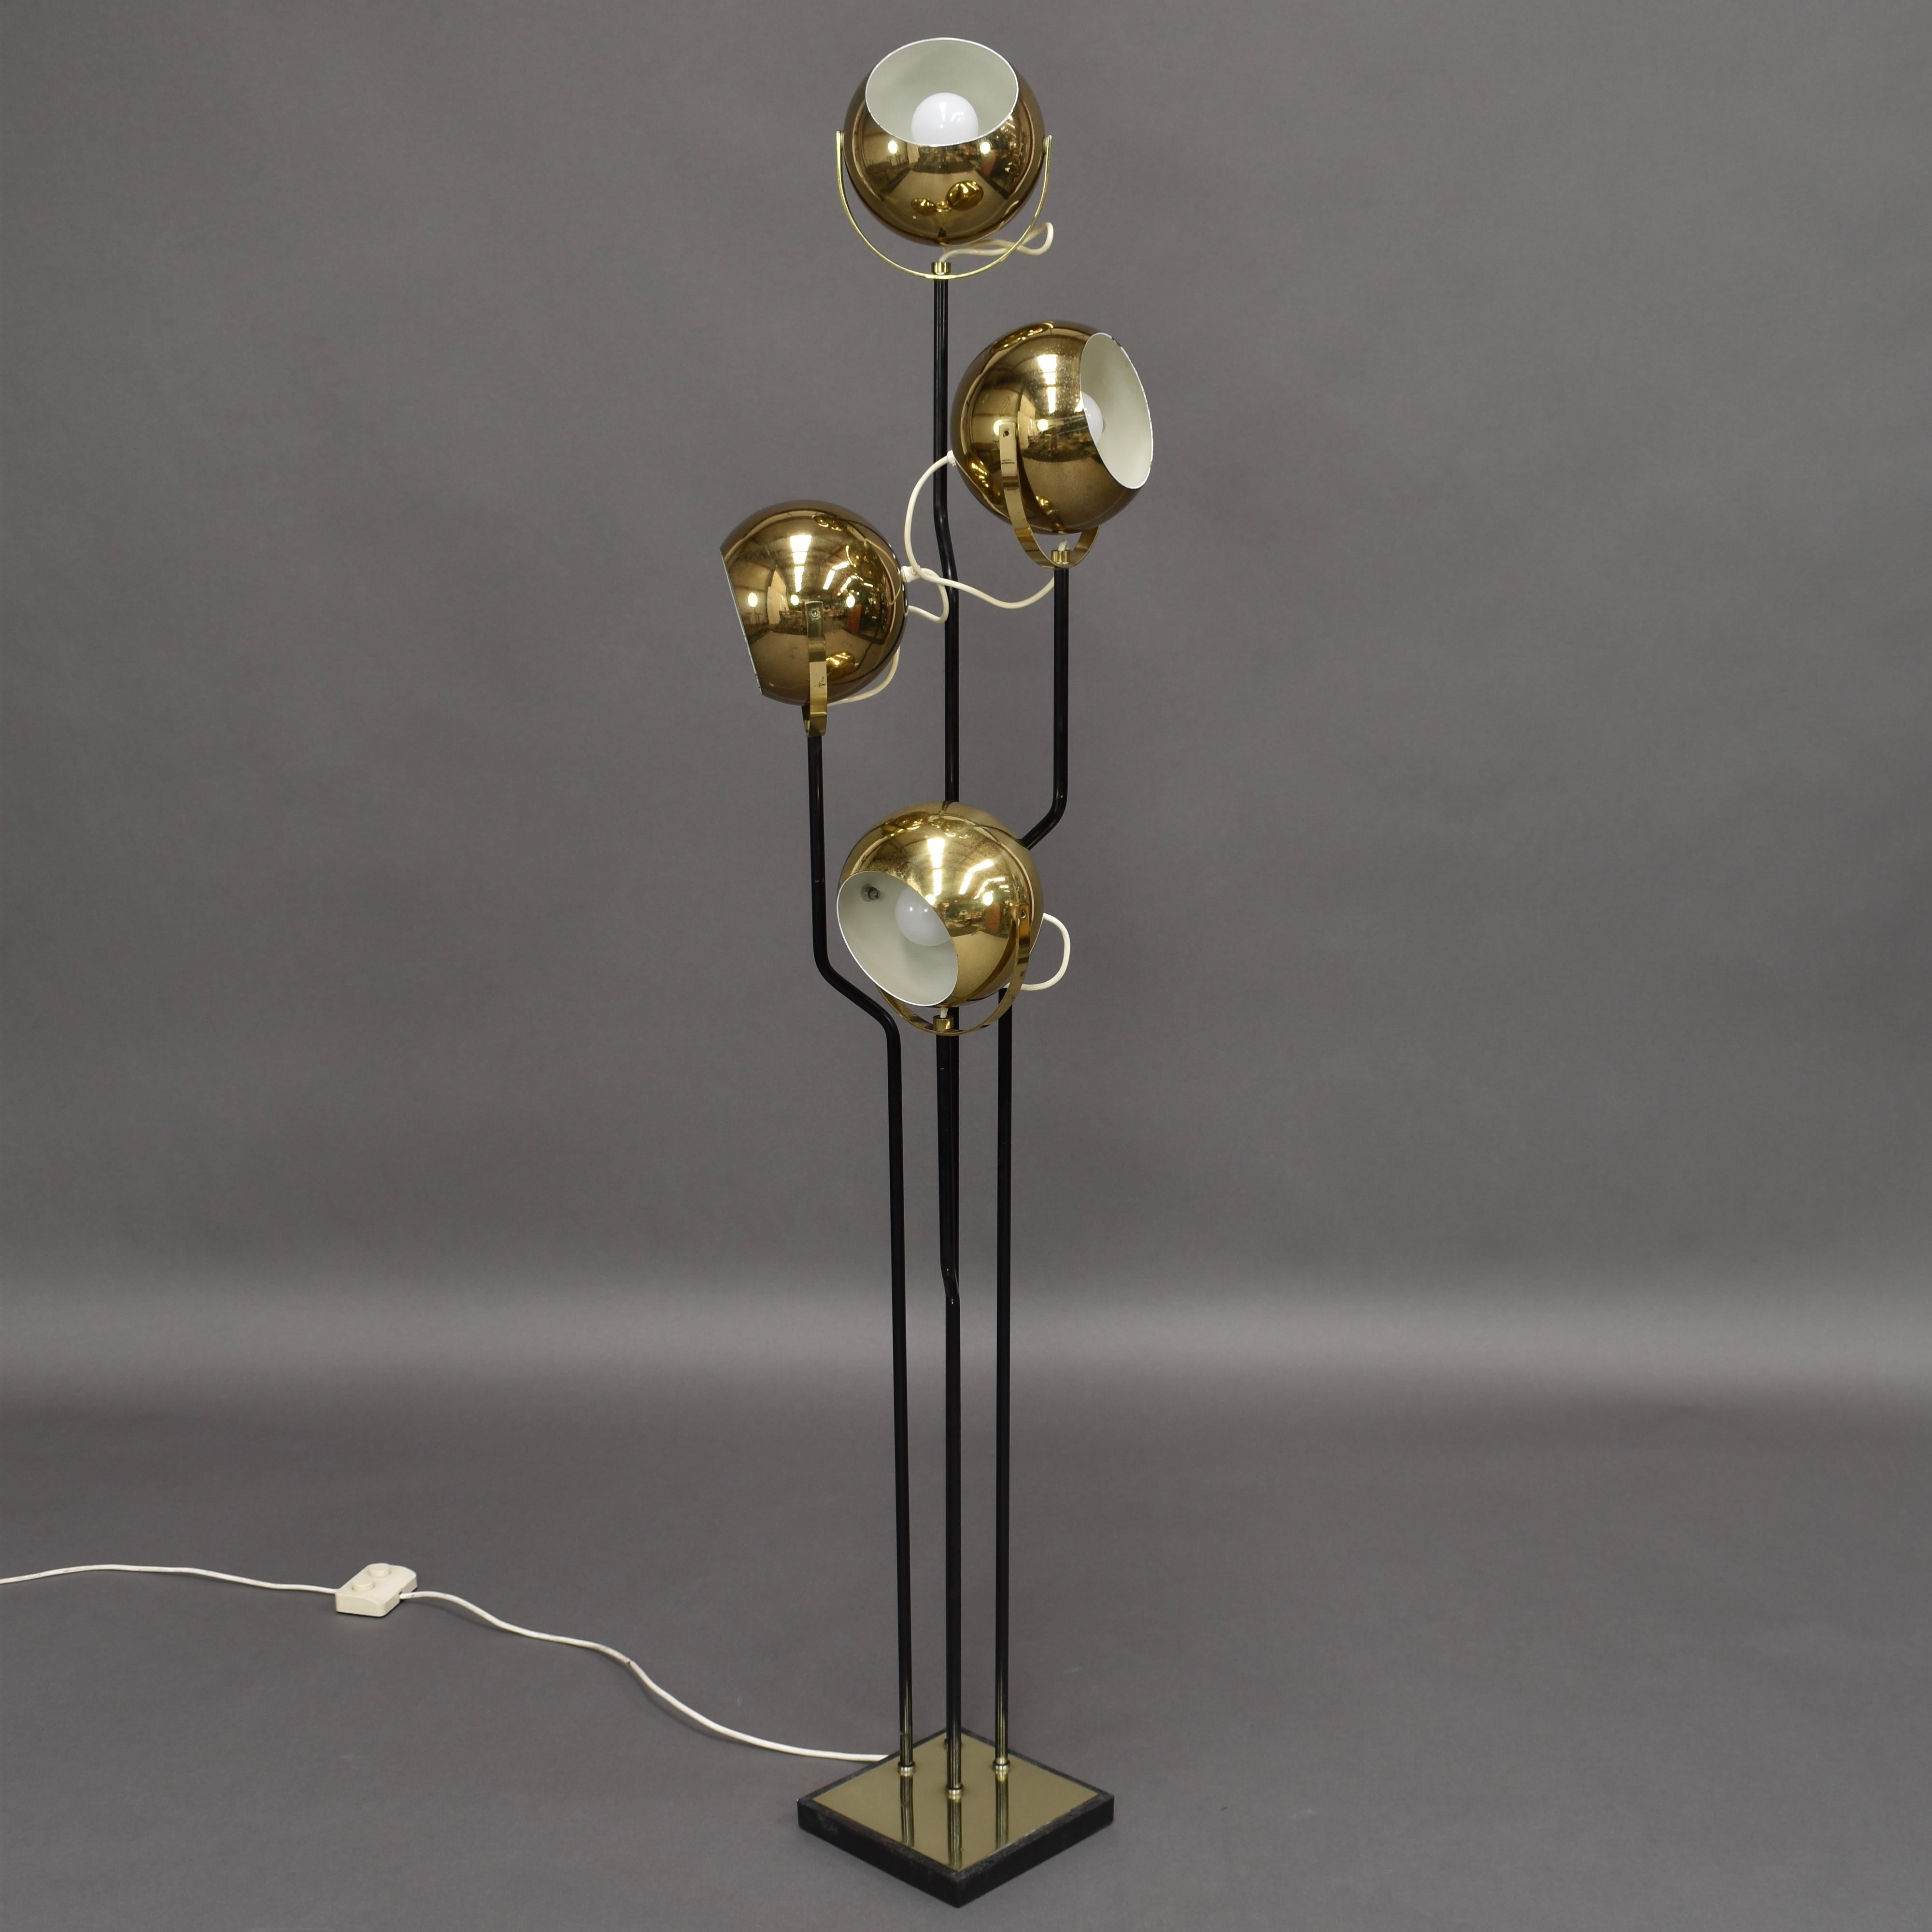 Stunning brass four-globe floor lamp by Goffredo Reggiani, Italy, 1970s. The two upper and the two lower spots can be lit separate from each other, or all four at the same time. Suitable for USA use. This is a rare model.

Designer: Goffredo